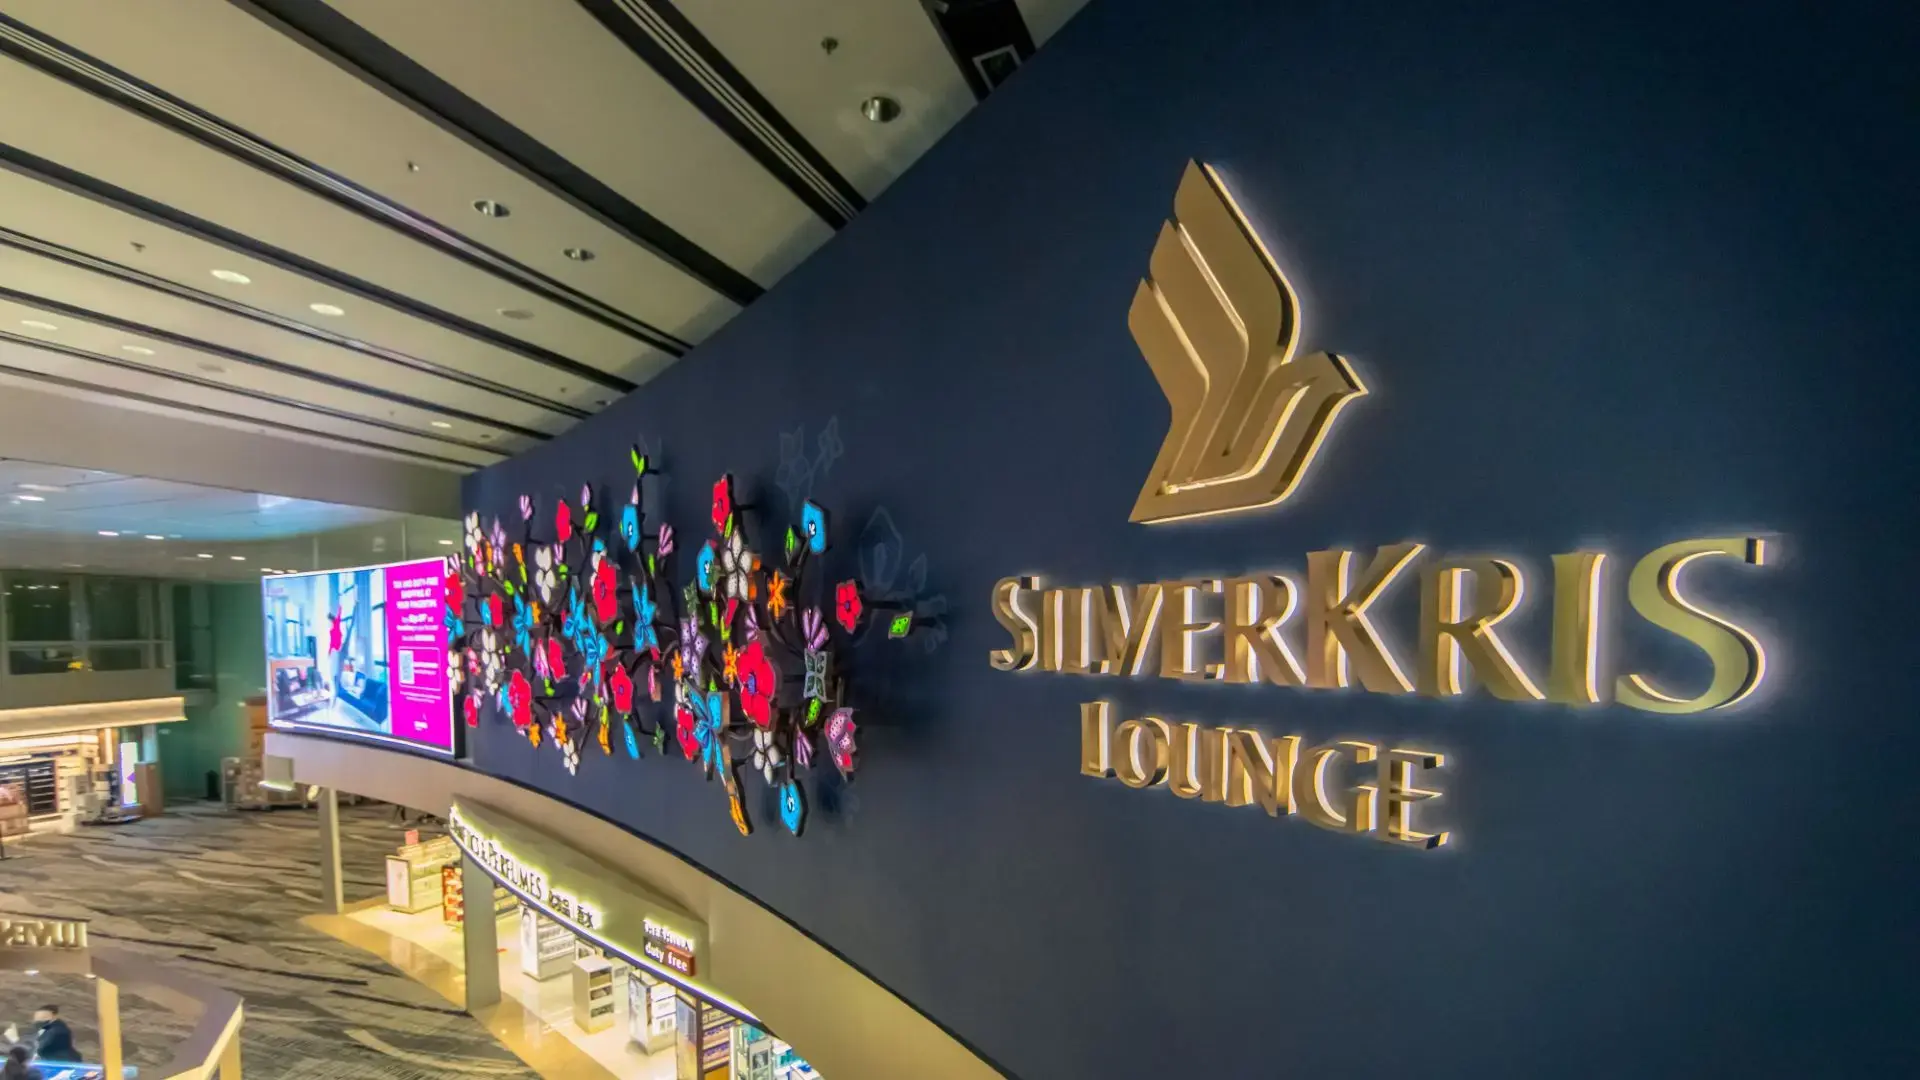 Singapore Airlines – SilverKris Business Lounge